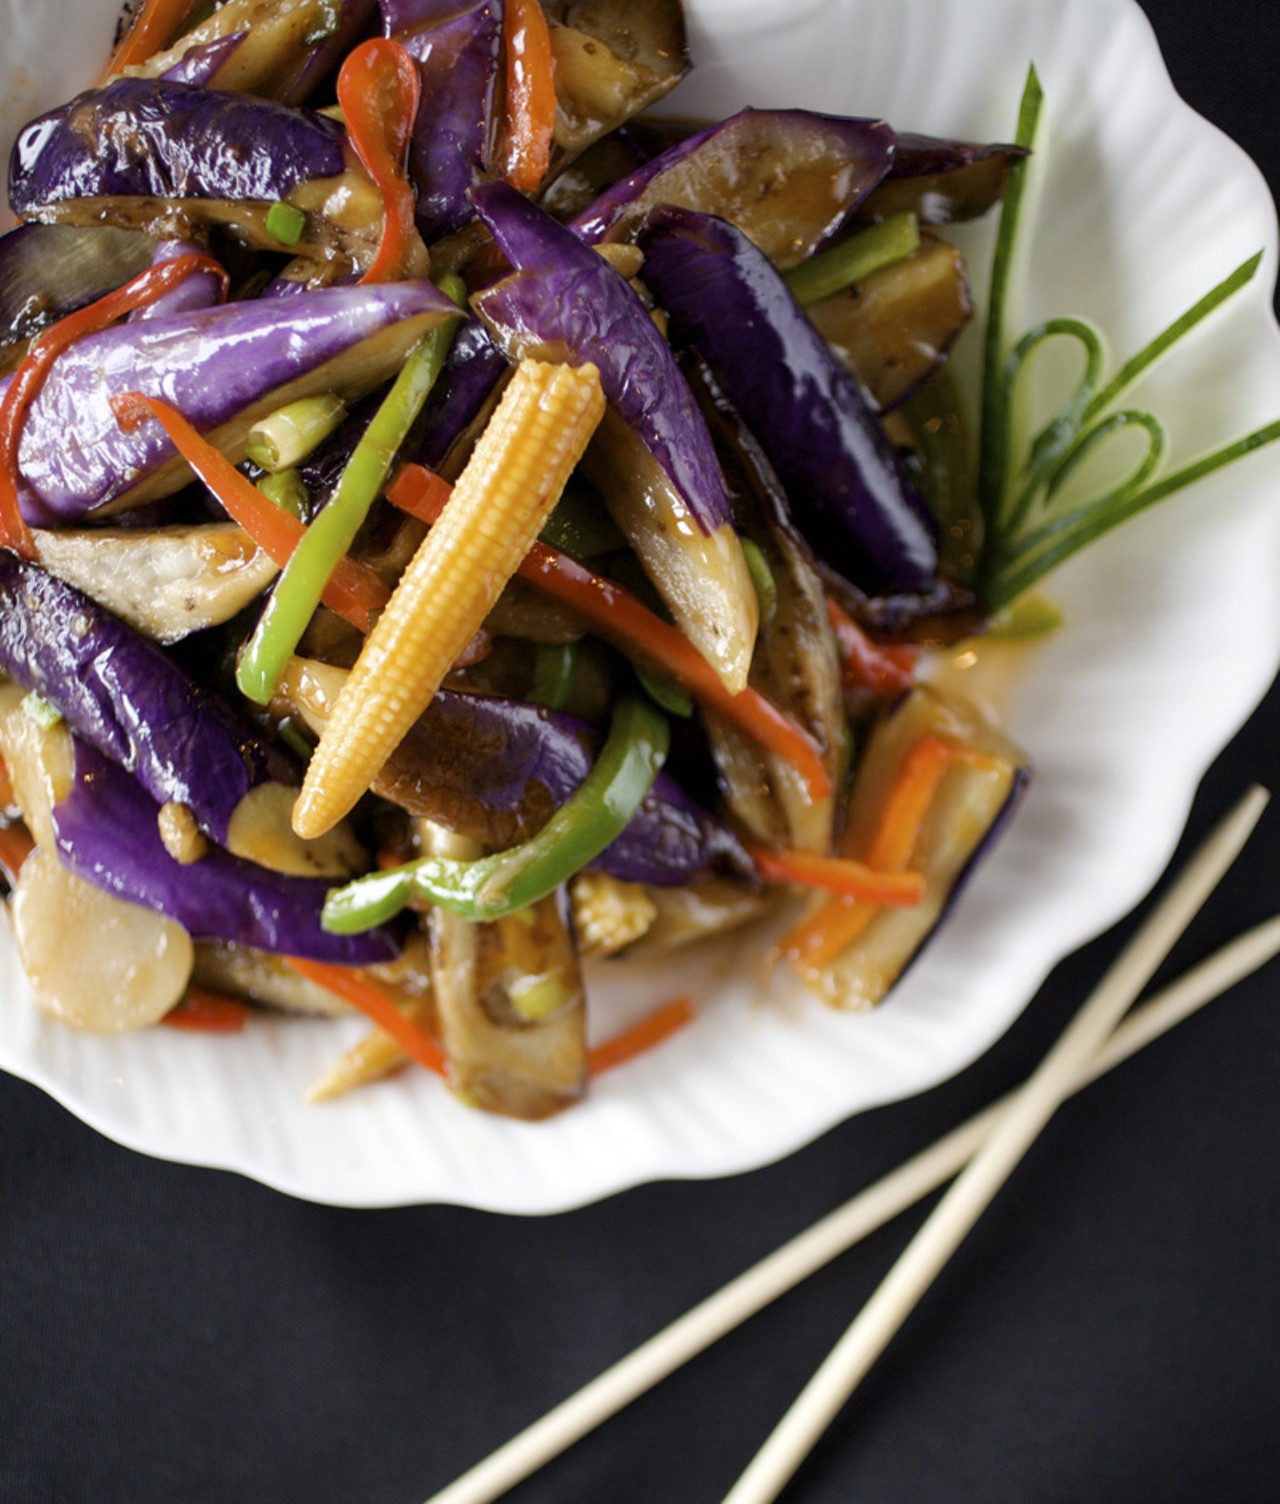 Fragrant Eggplant is prepared with eggplant, scallions, garlic and a house made sauce.